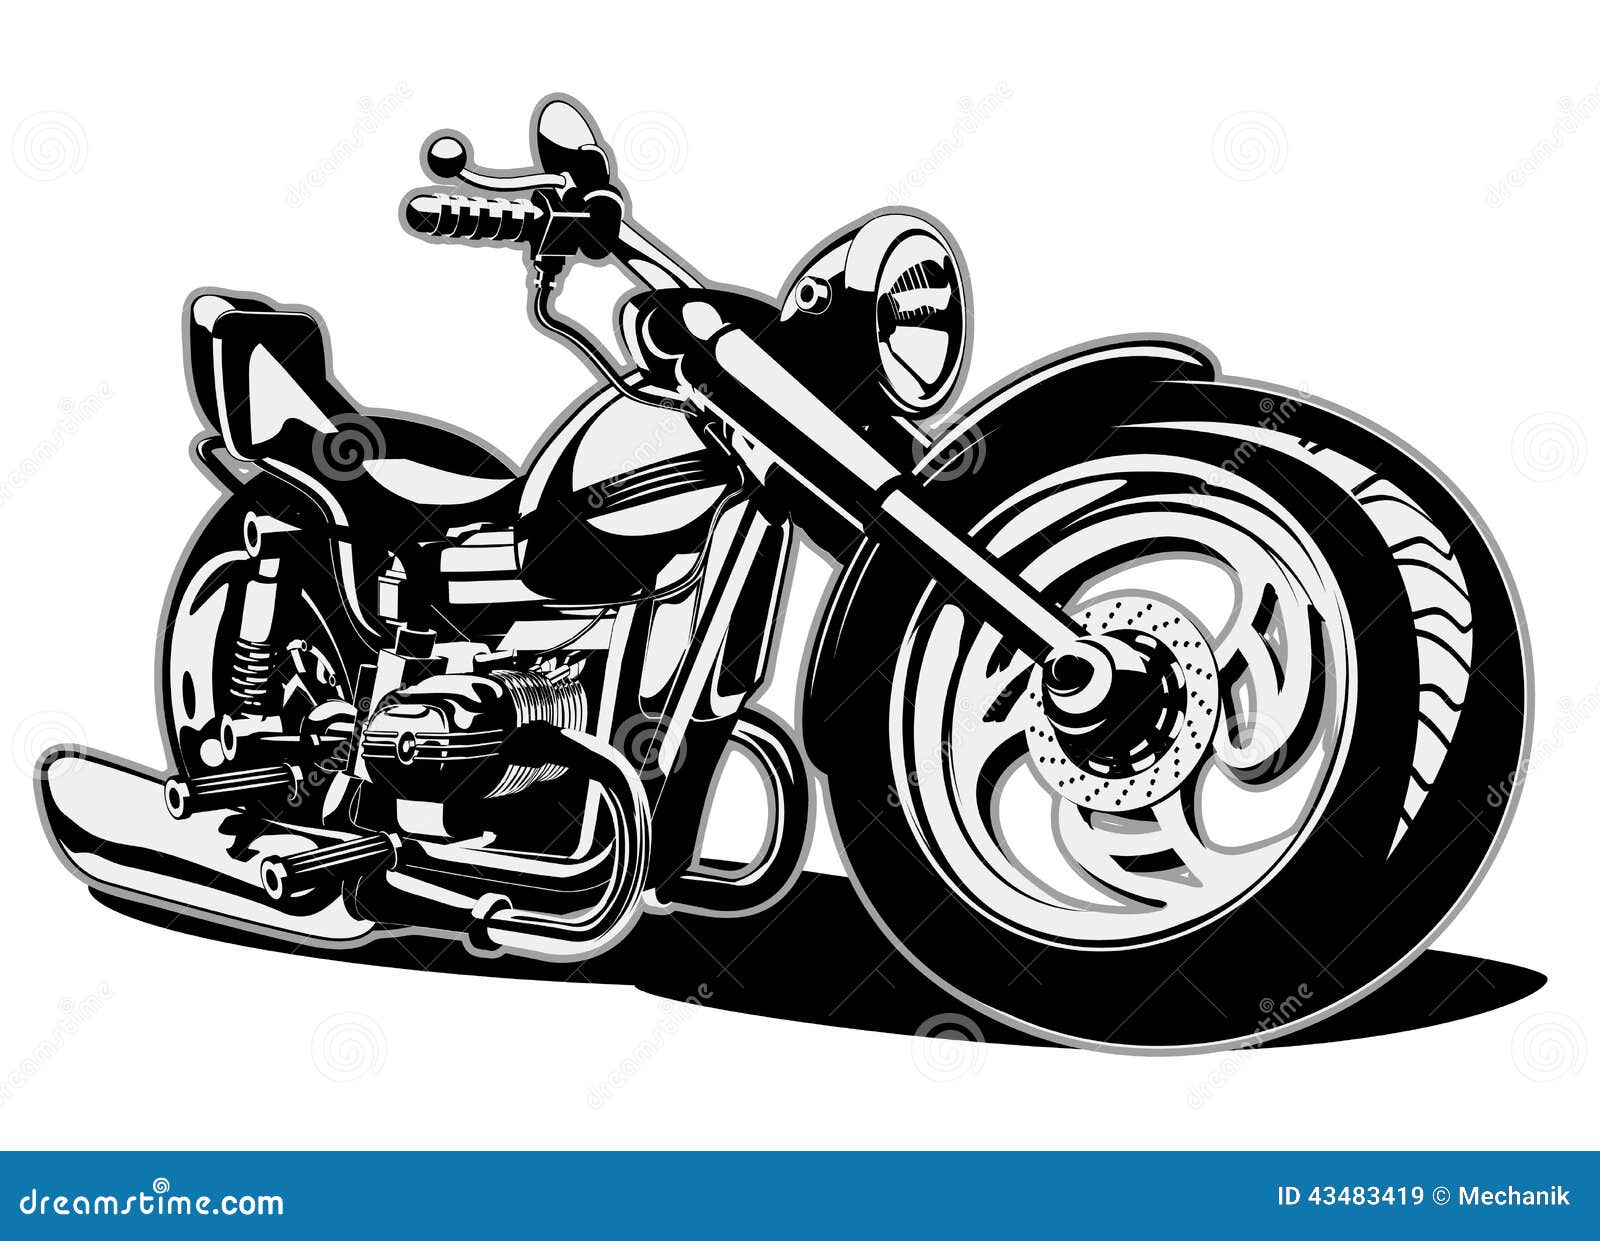 vector cartoon motorbike available eps format separated layers easy edit 43483419